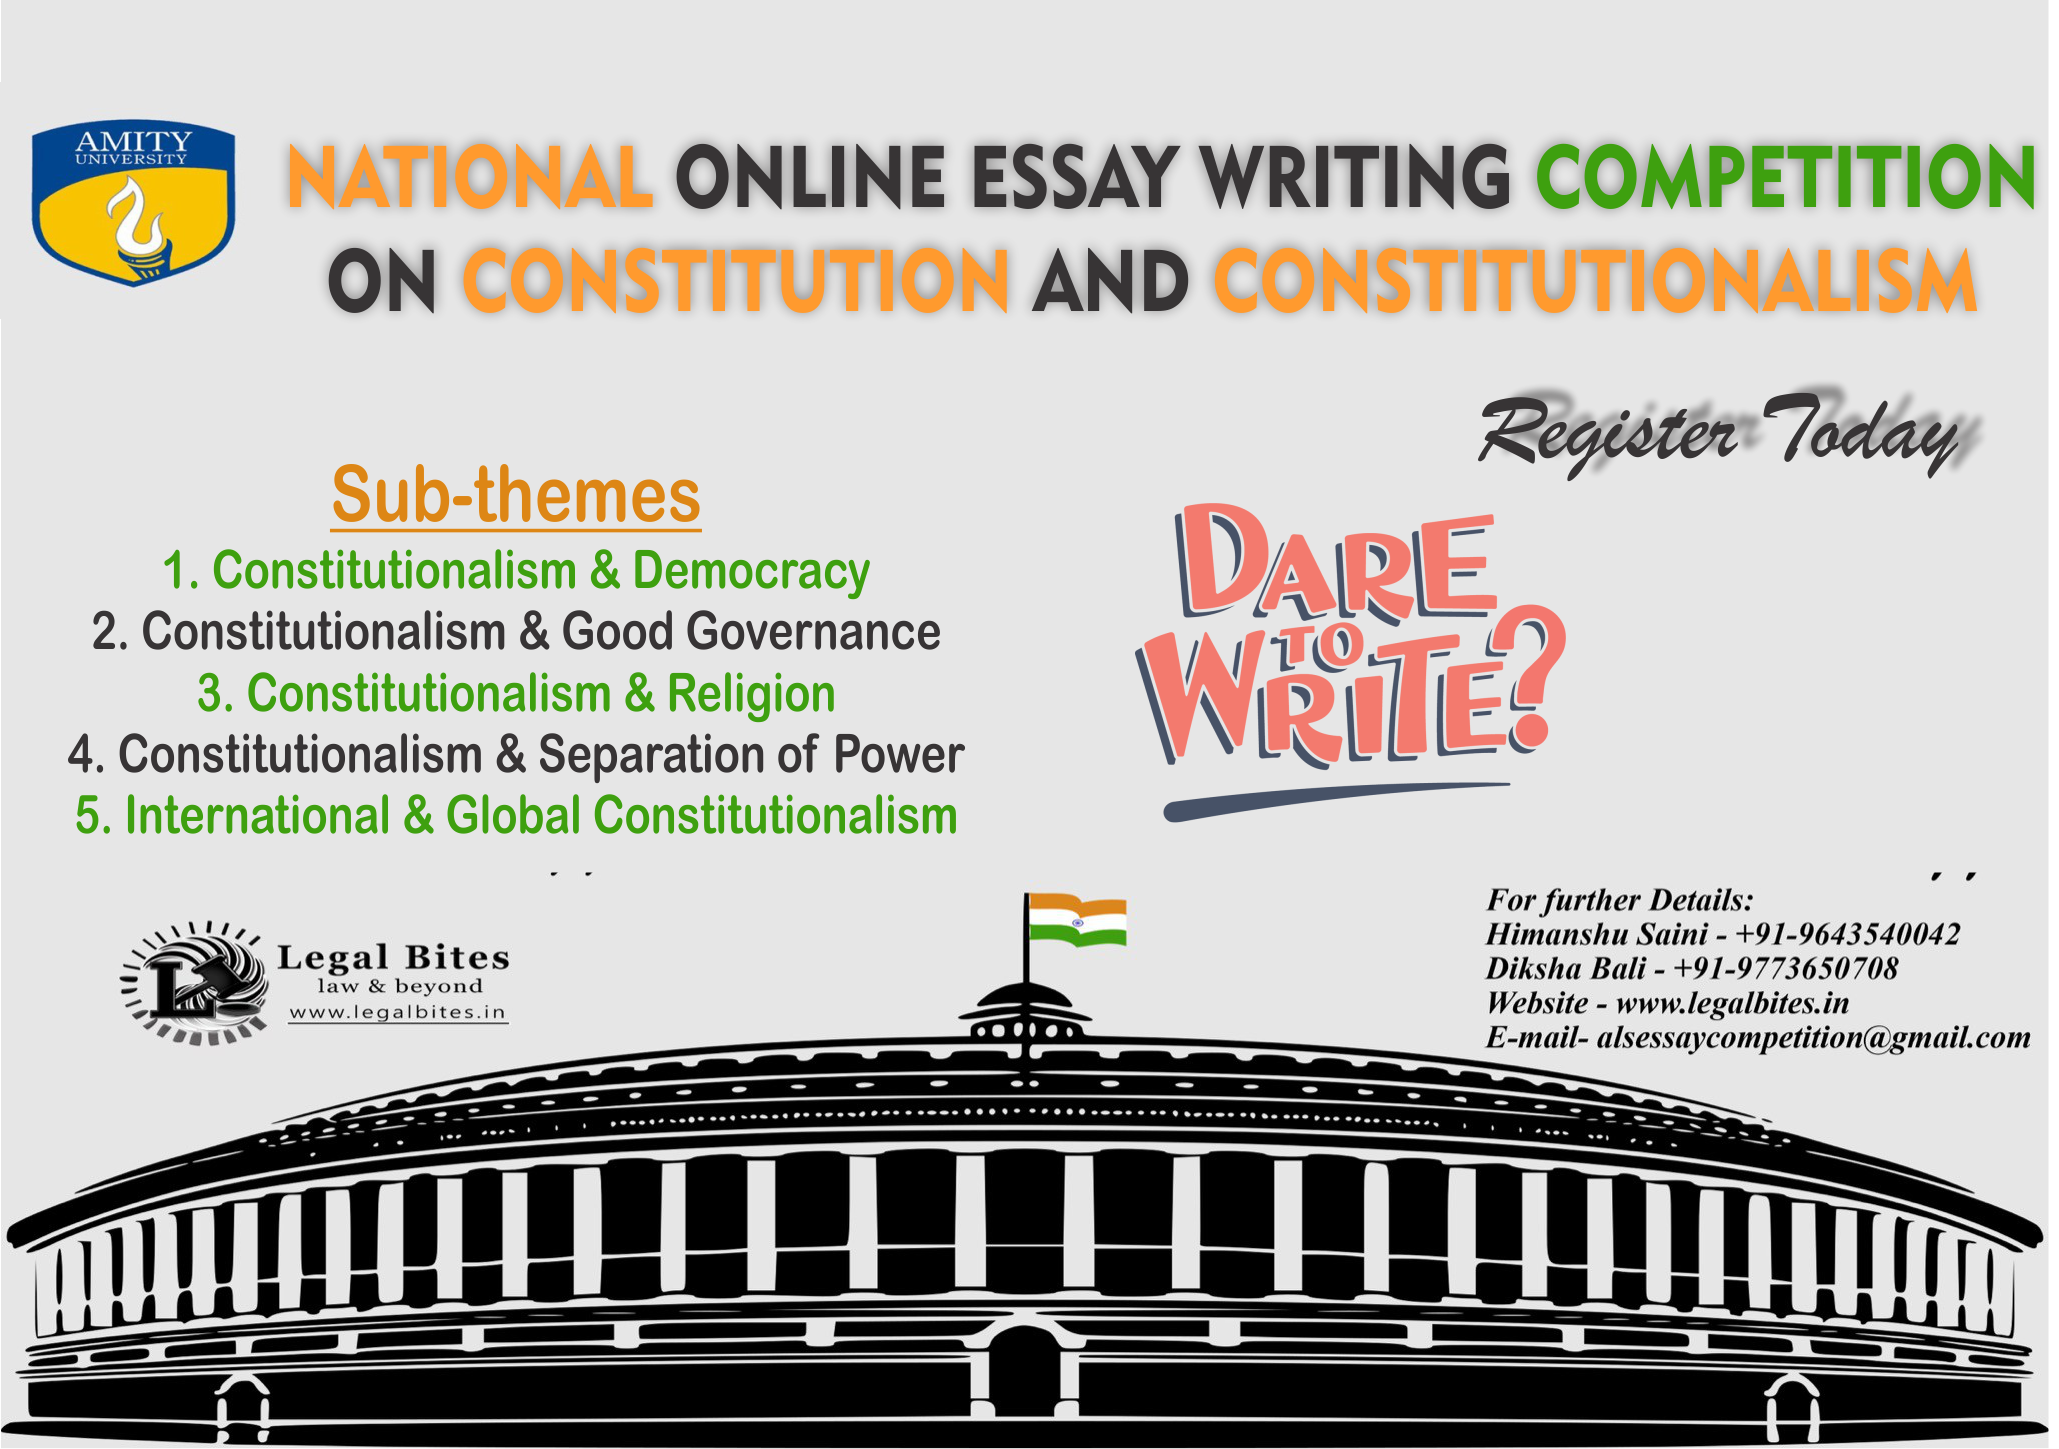 National Essay Writing Competition on Constitution And Constitutionalism 2018: Register Now